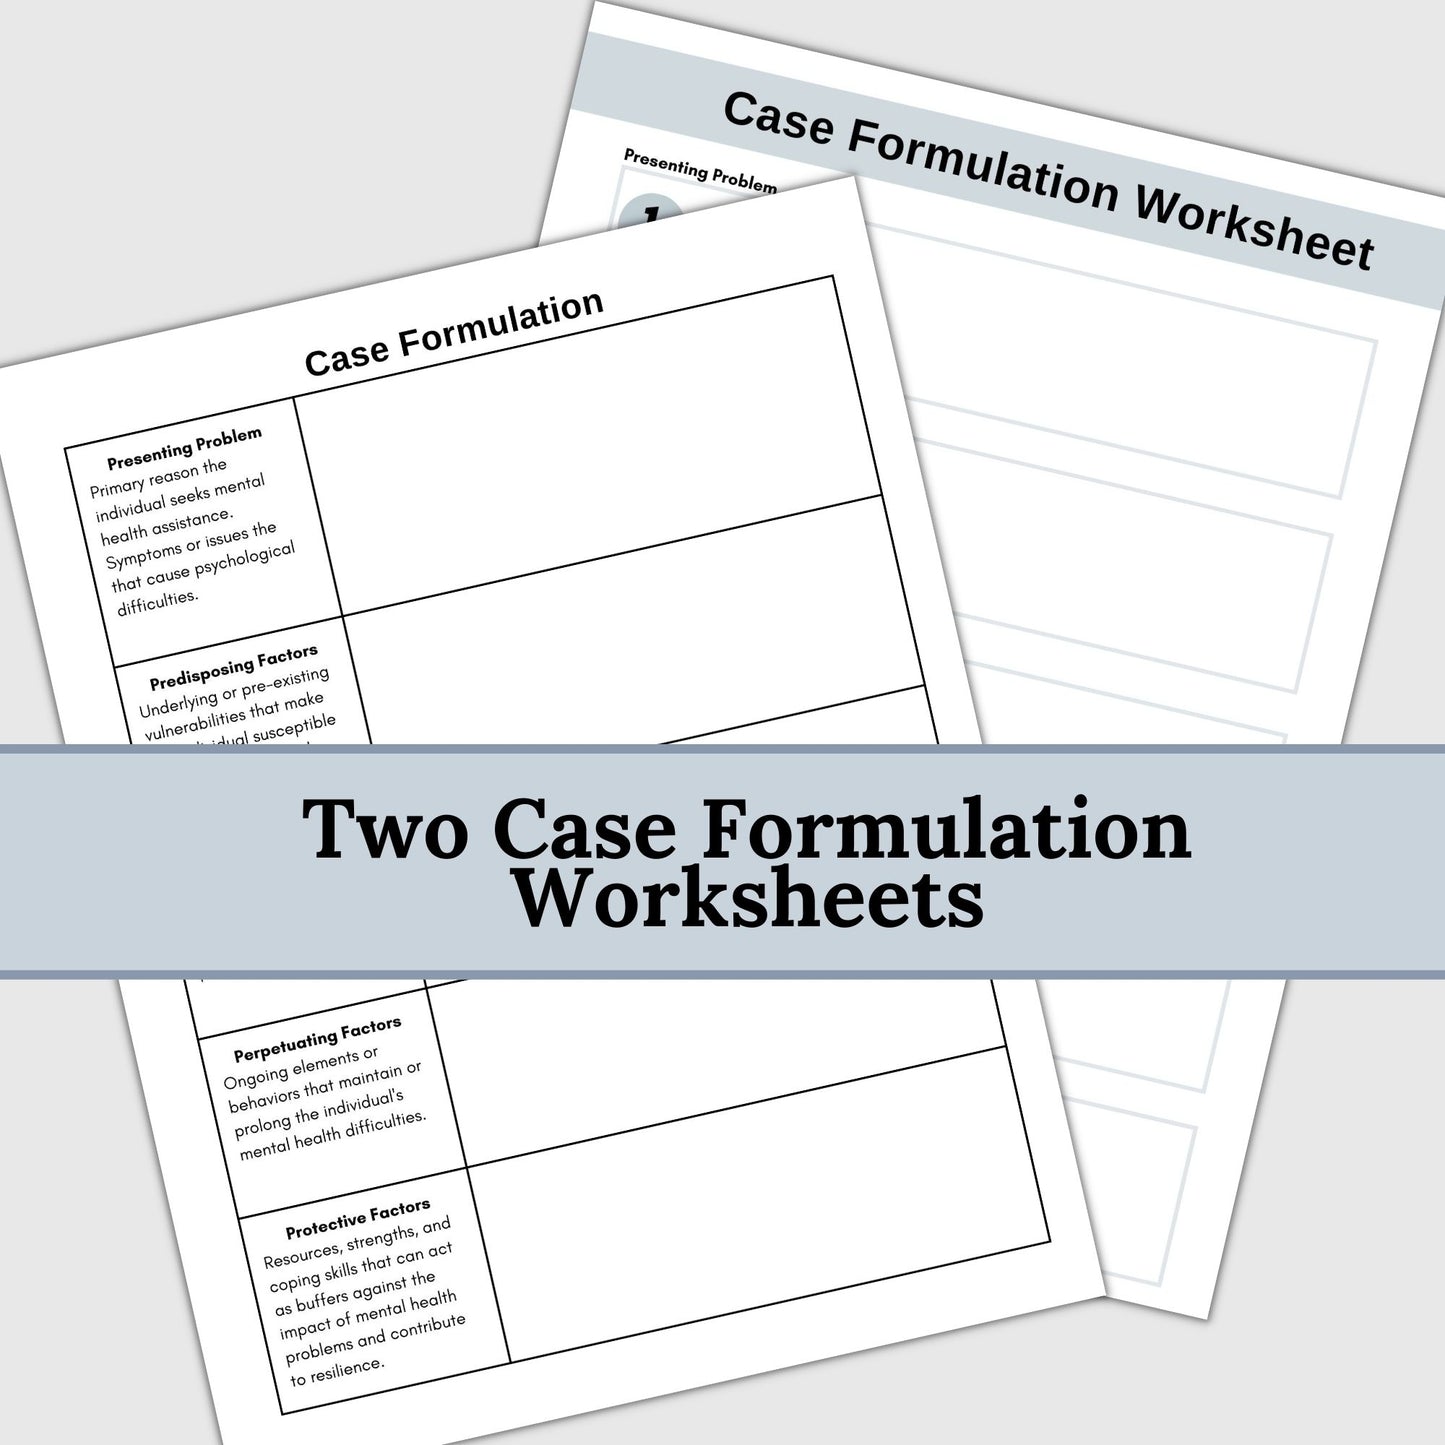 Our Case Formulation Information and Worksheets are here to empower you with the 5 Ps framework – a powerful tool for gaining deeper insights into your clients mental health concerns.